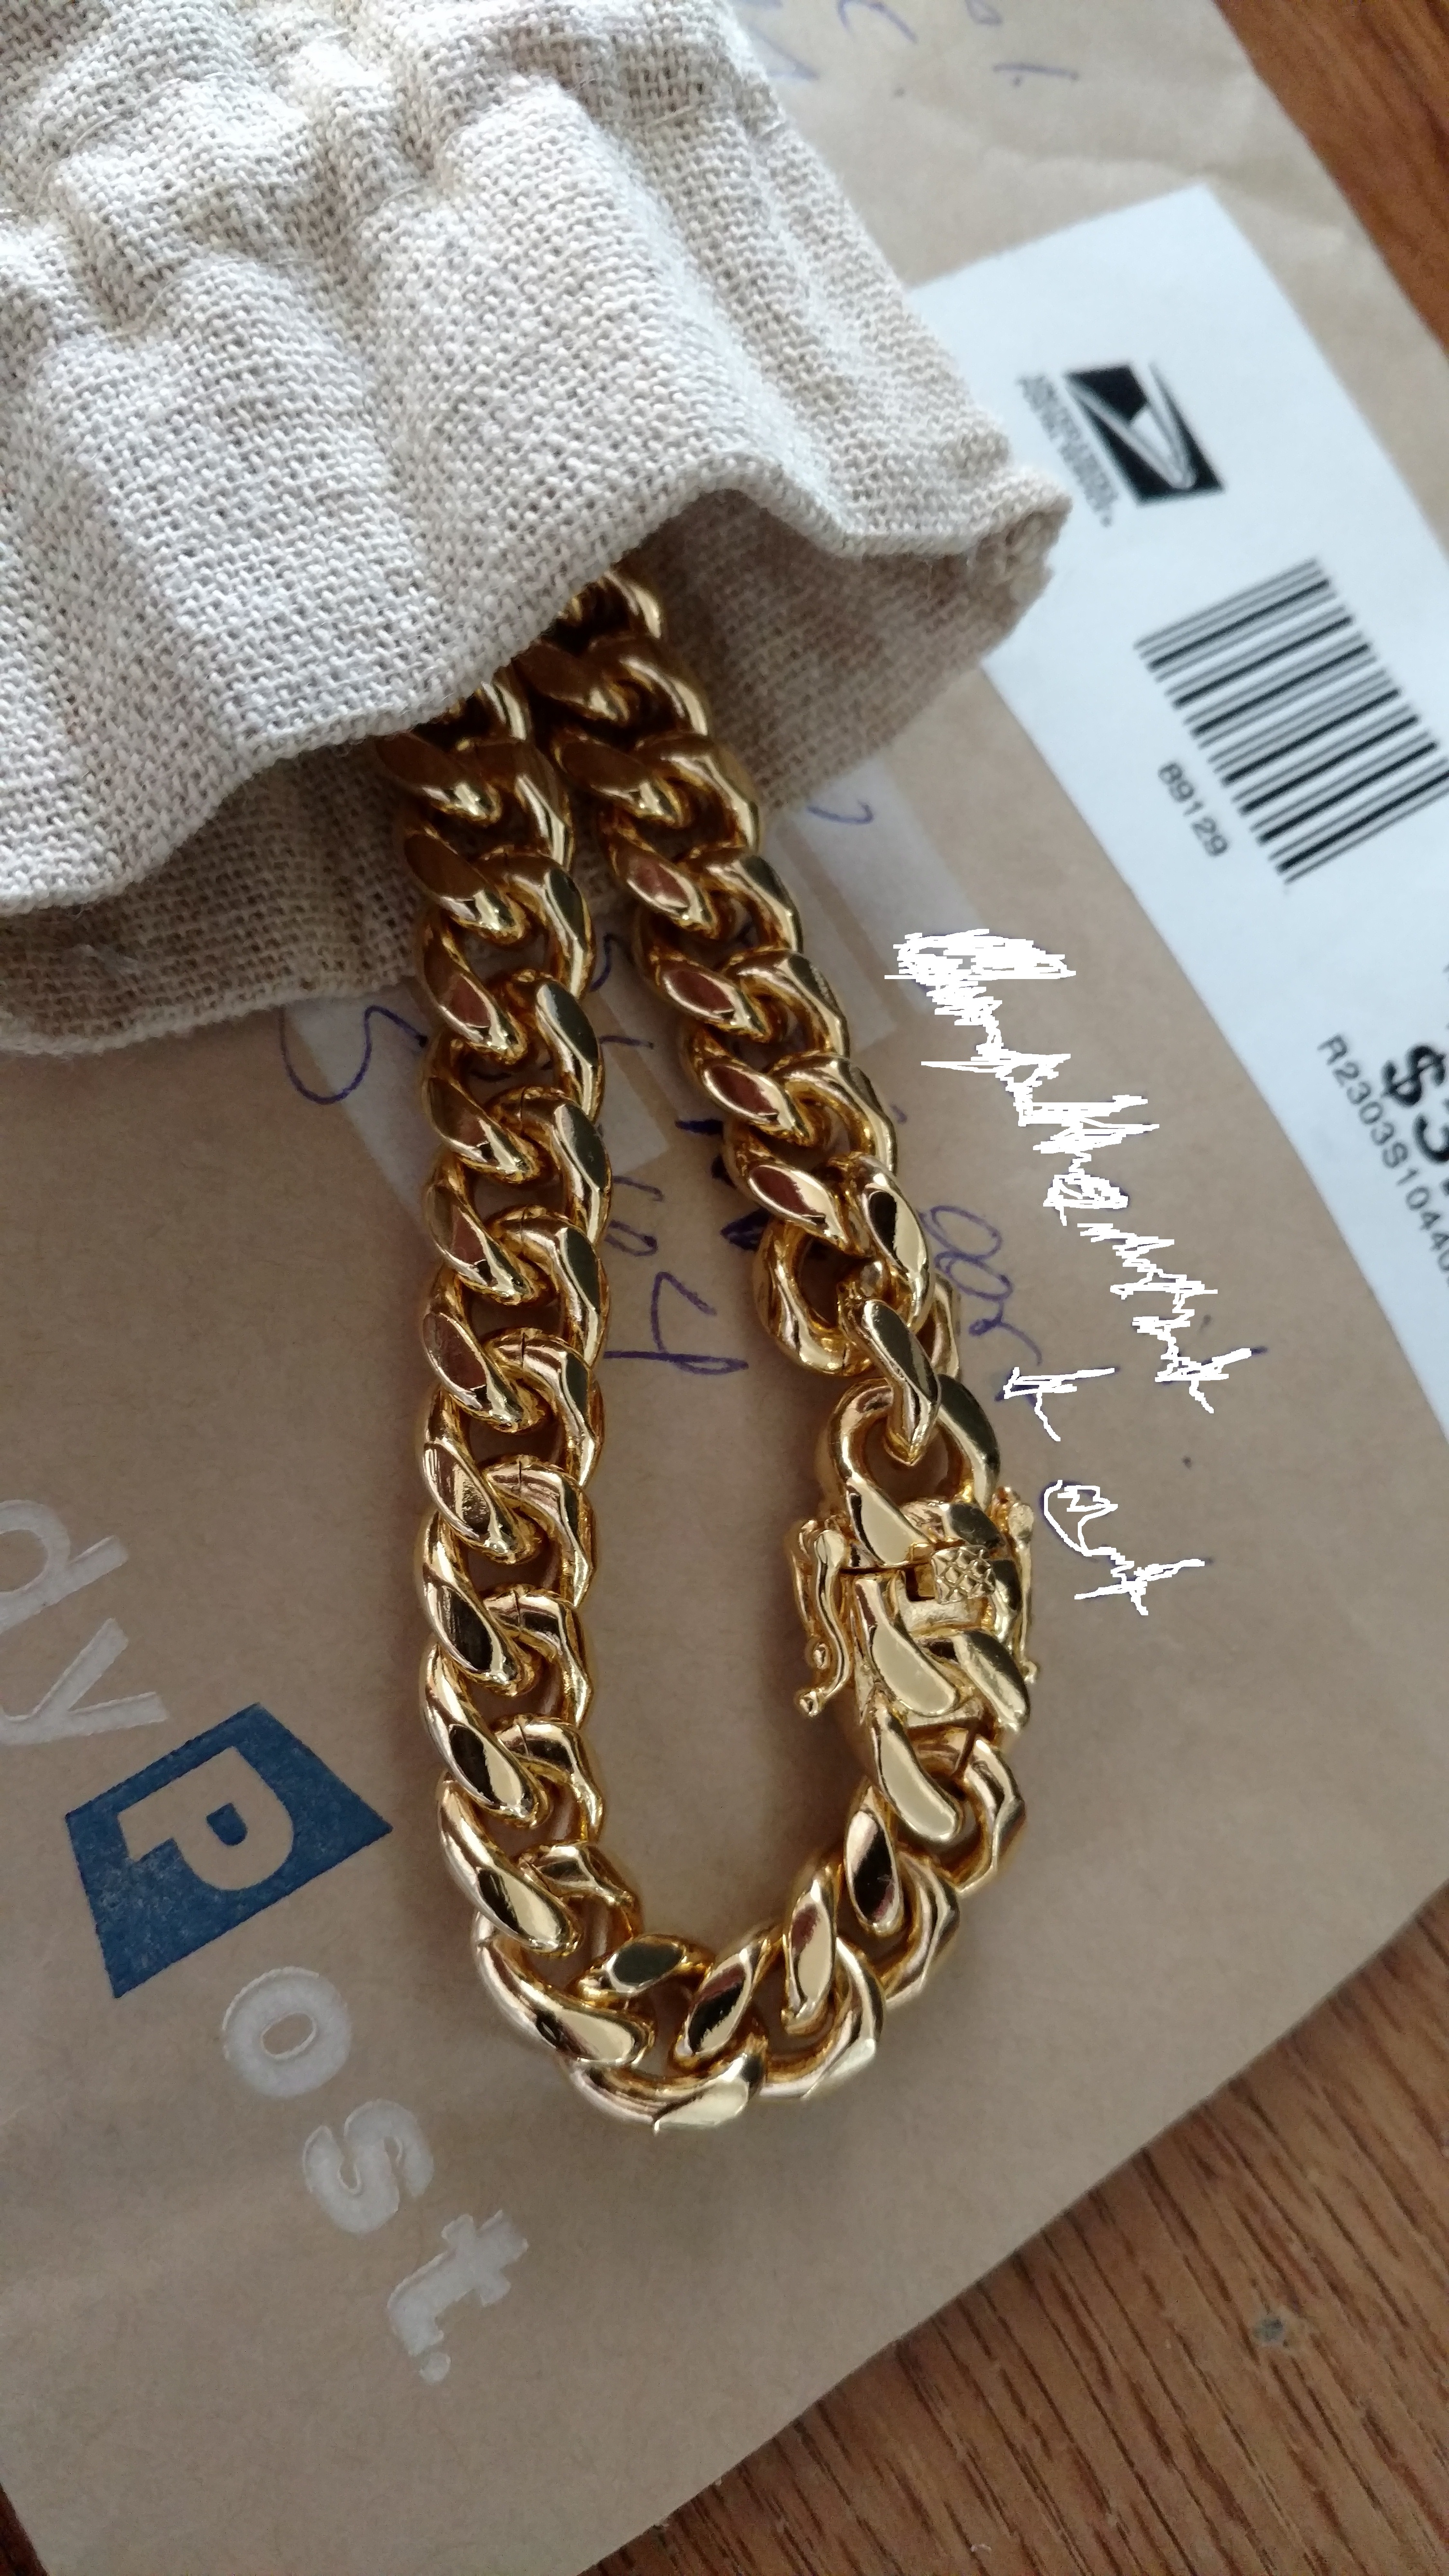 | This is the yellow gold chain he sent me instead of a white gold chain that I ordered and paid for. |